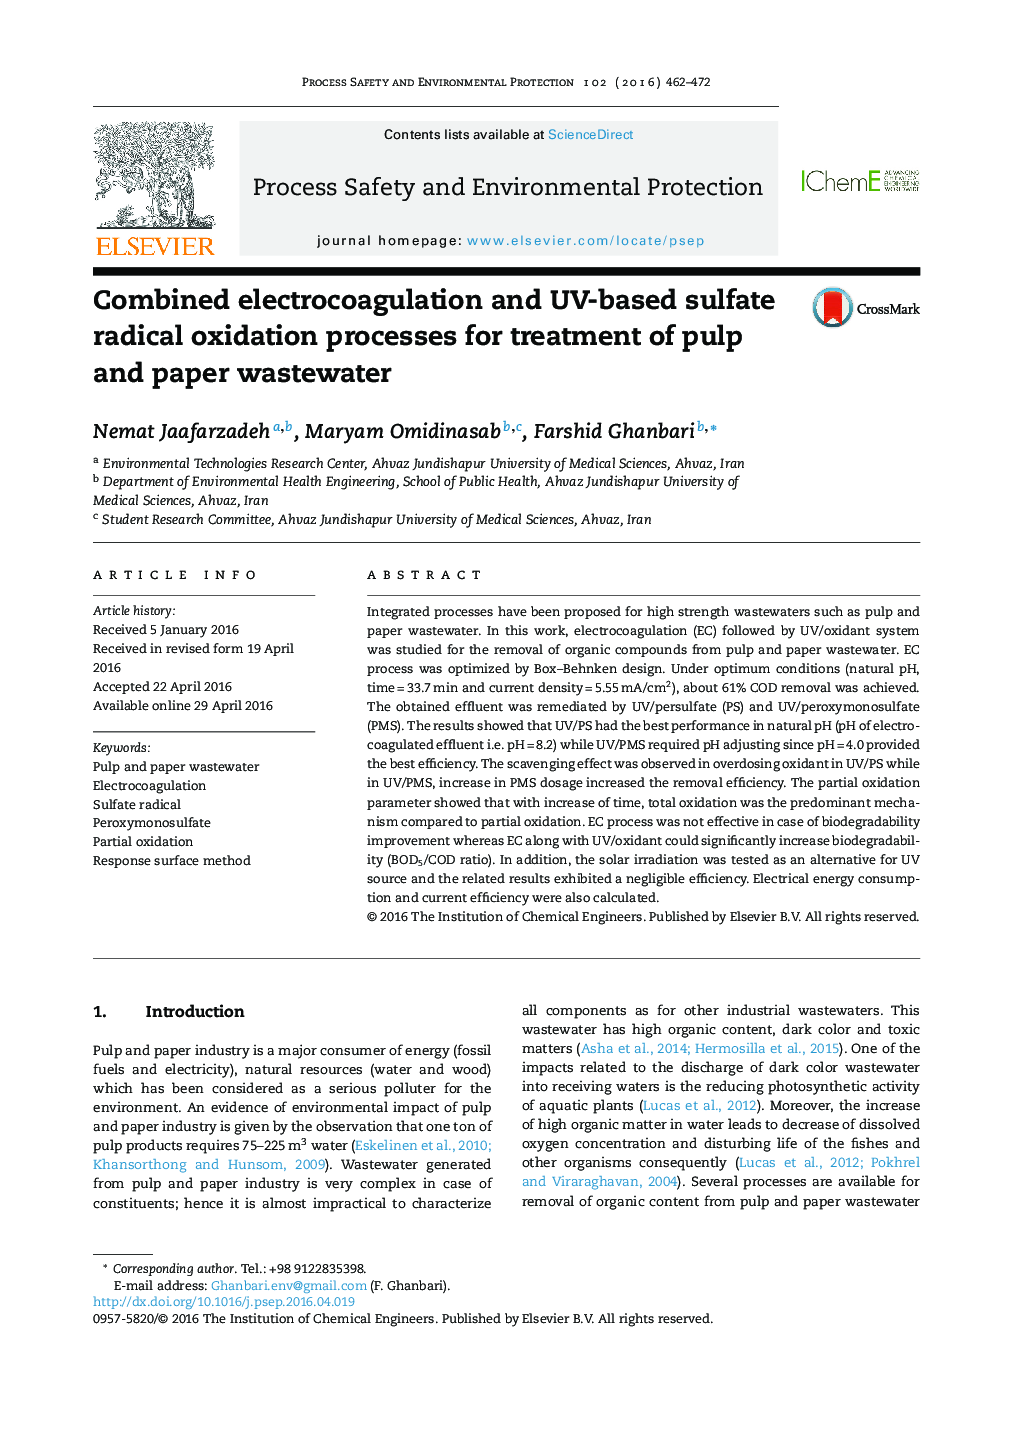 Combined electrocoagulation and UV-based sulfate radical oxidation processes for treatment of pulp and paper wastewater